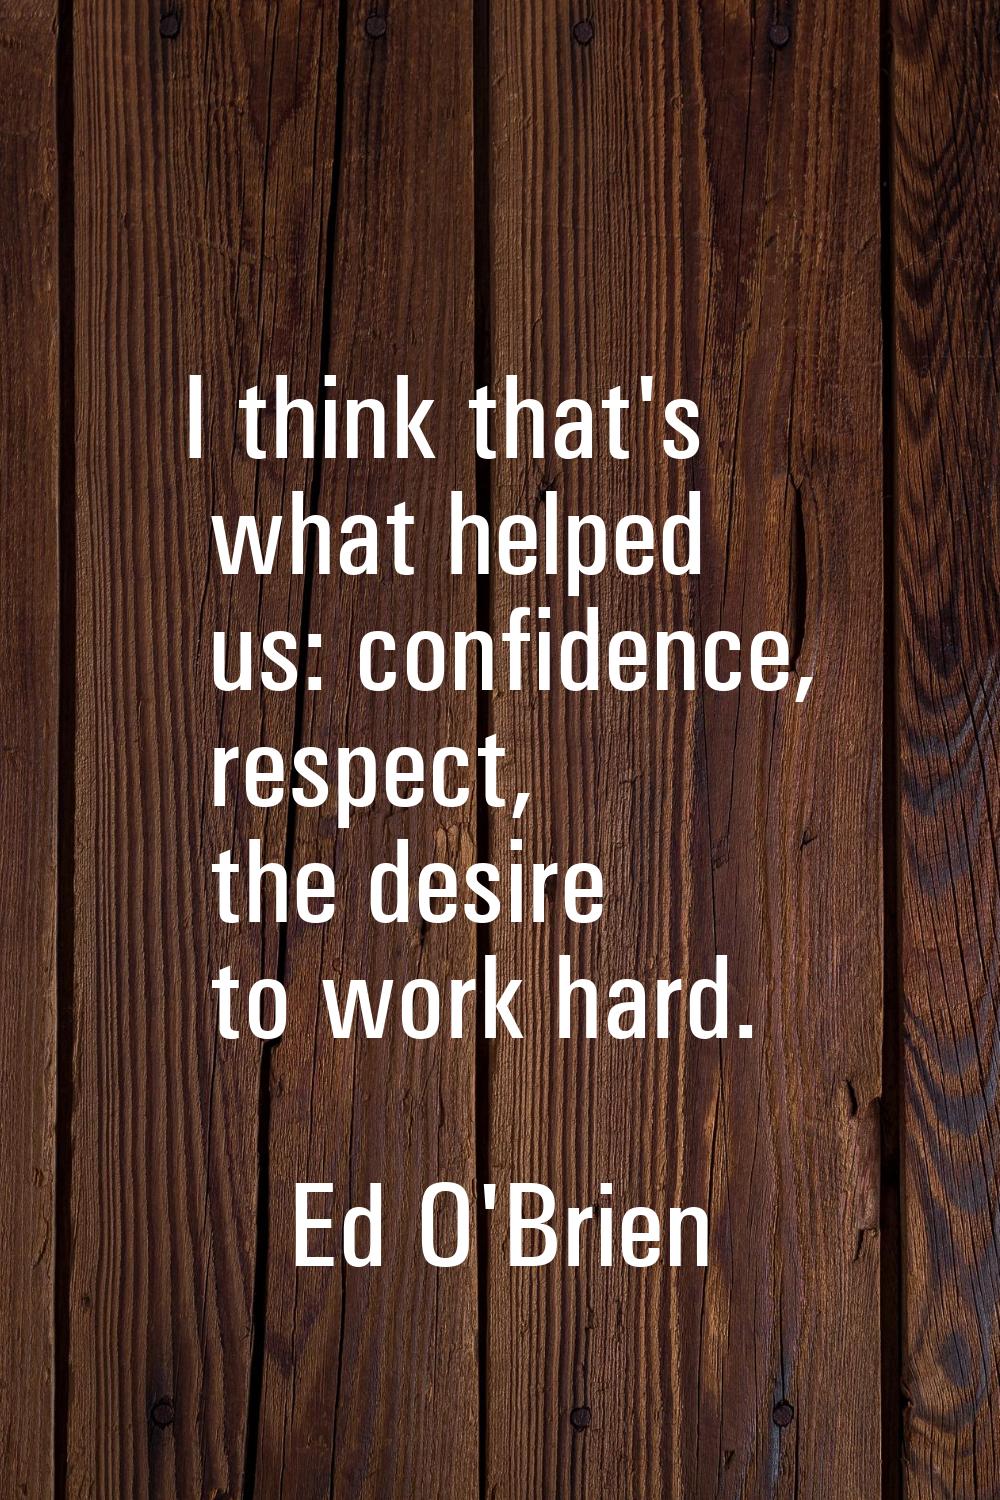 I think that's what helped us: confidence, respect, the desire to work hard.